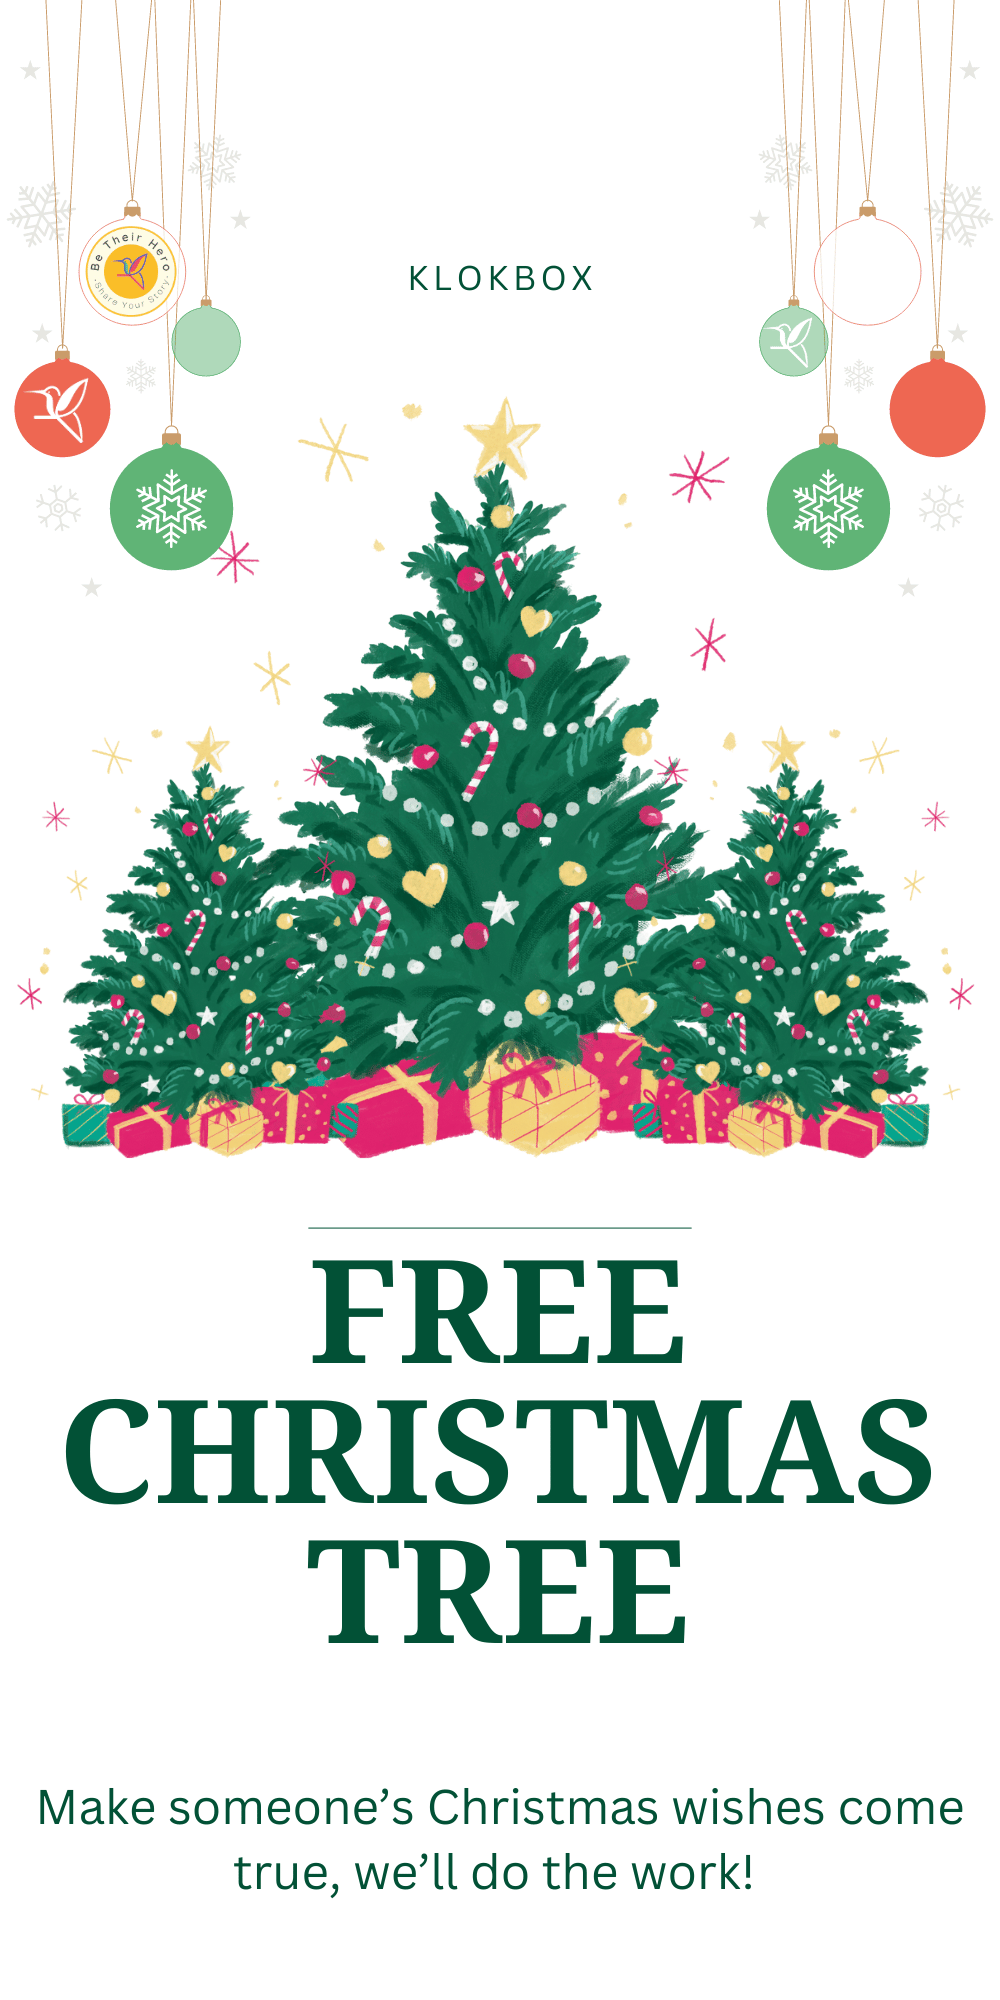 You Can Make a Difference; Nominate Someone For A Free Christmas Tree!